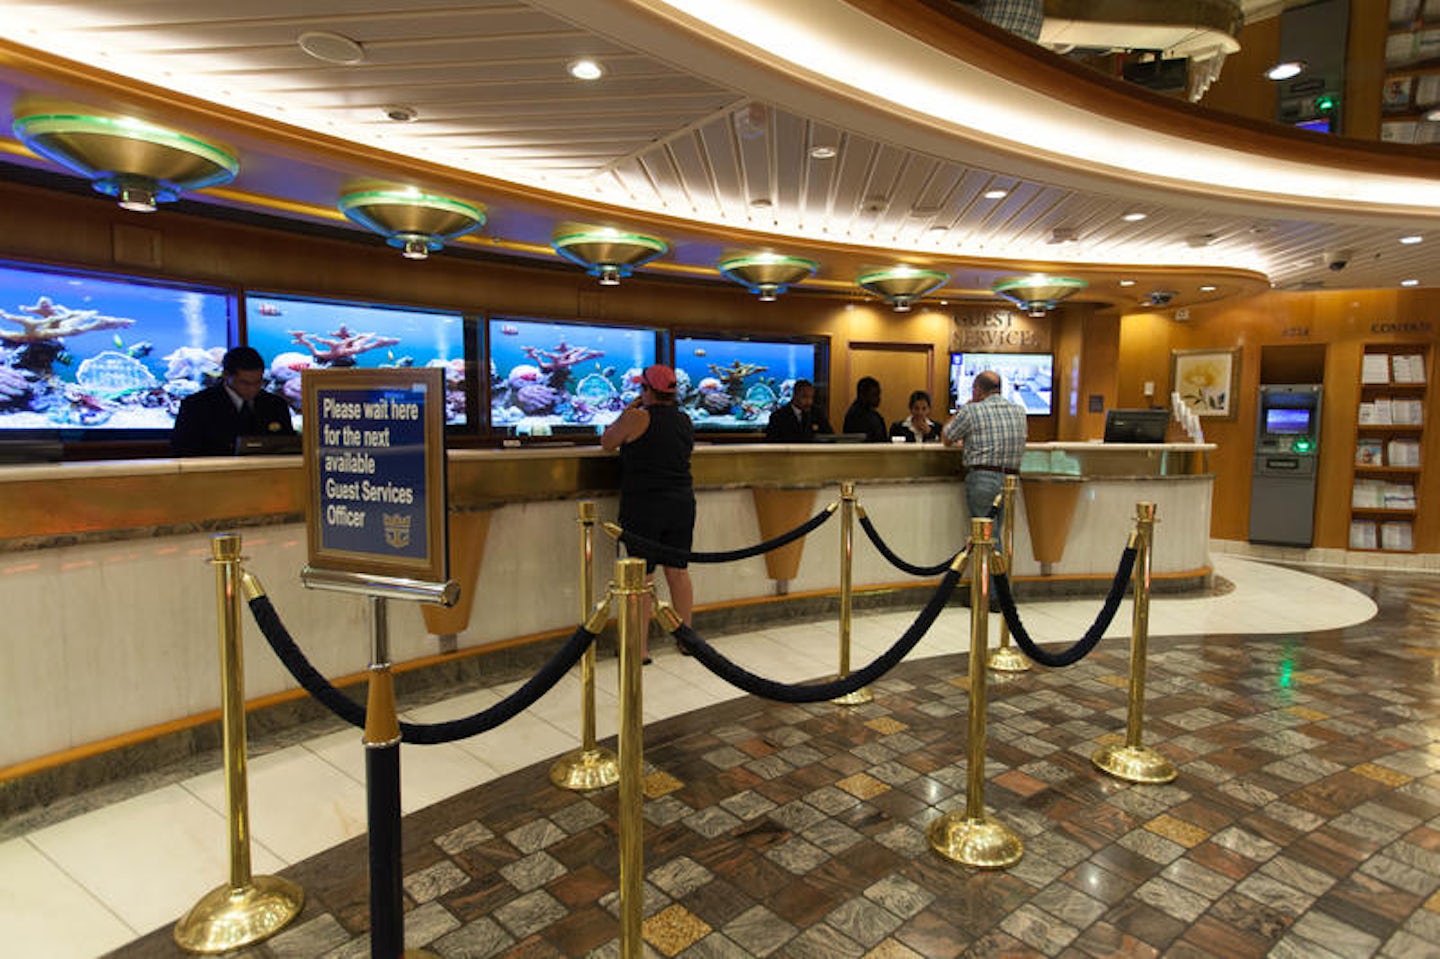 Guest Services on Independence of the Seas